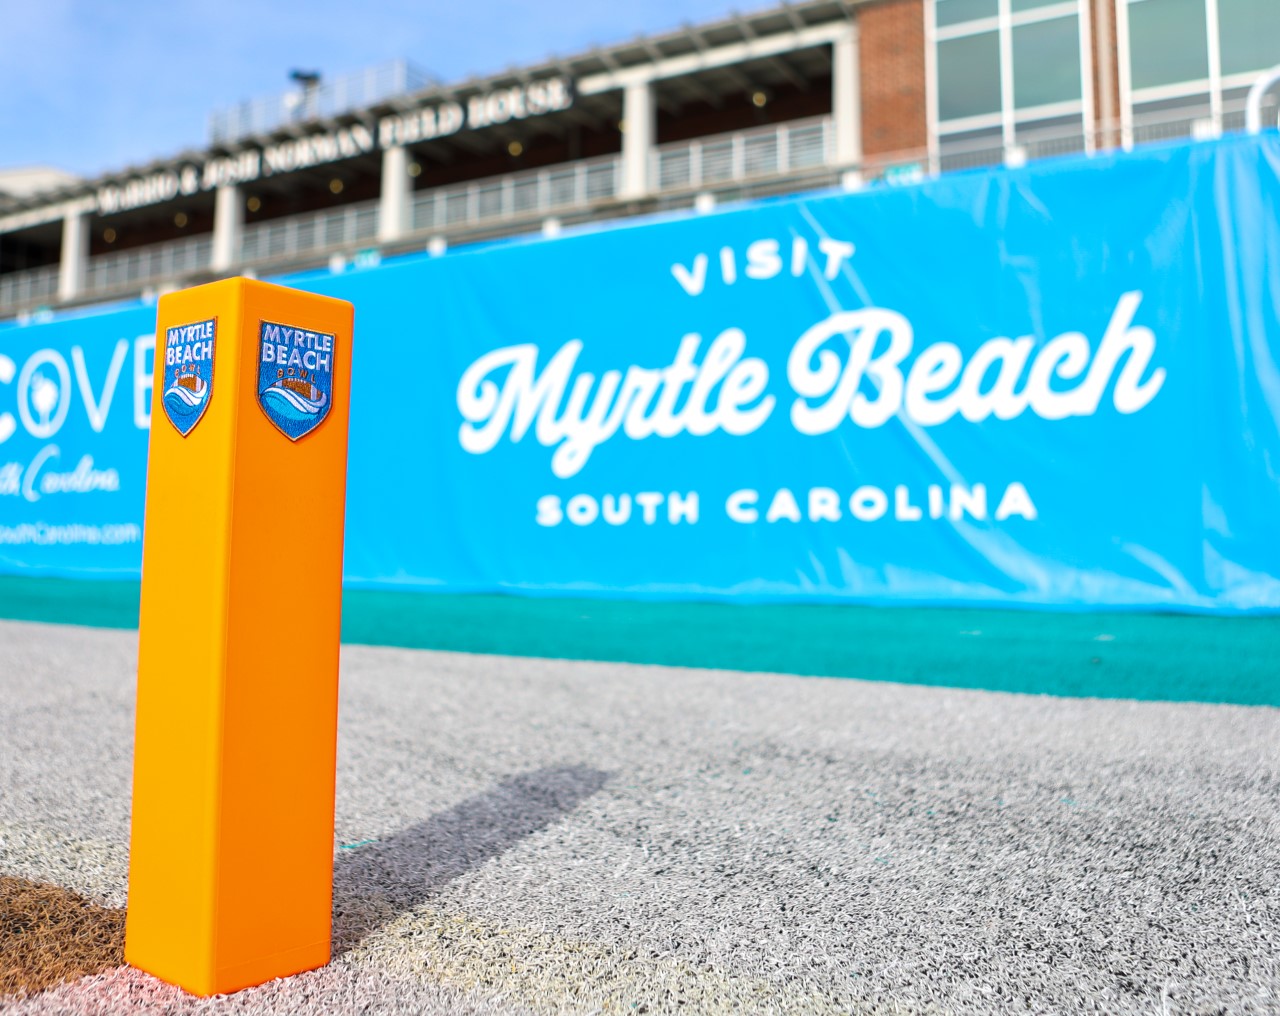 The Bowl Effect: How the Myrtle Beach Bowl has Brought Tourism to